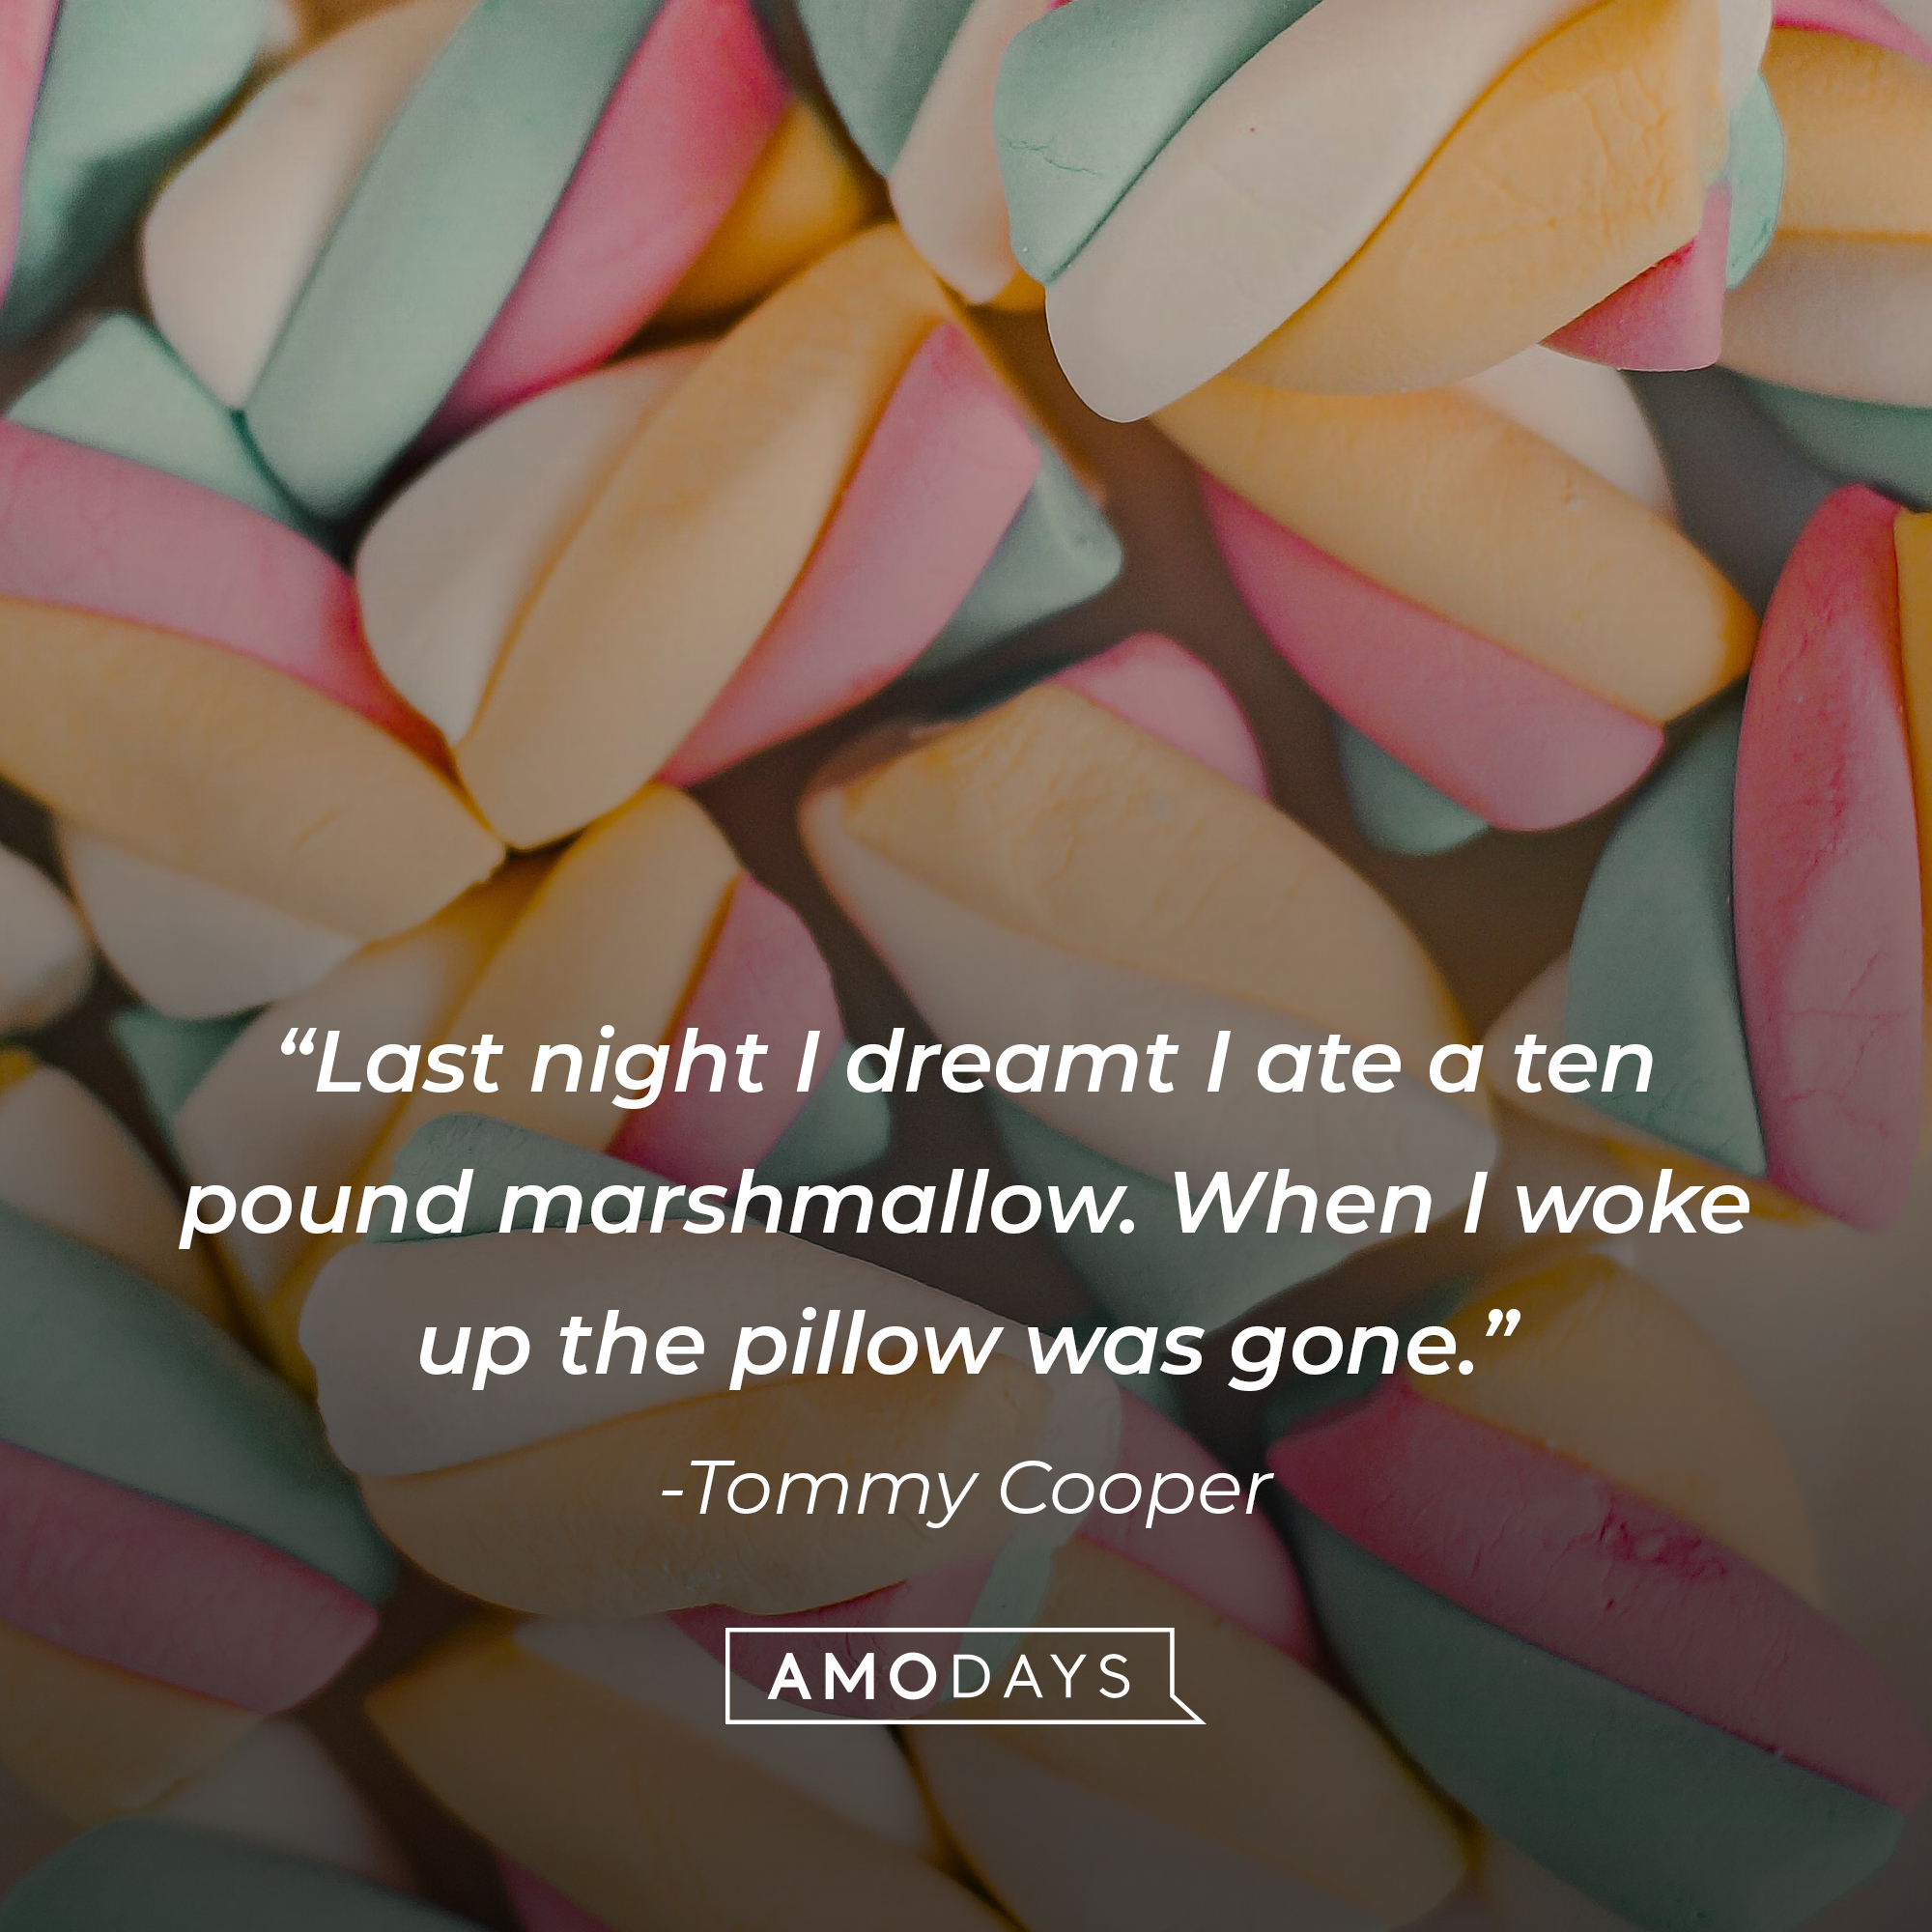 Tommy Cooper's quote: "Last night I dreamt I ate a ten pound marshmallow. When I woke up the pillow was gone." Source: Brainyquote